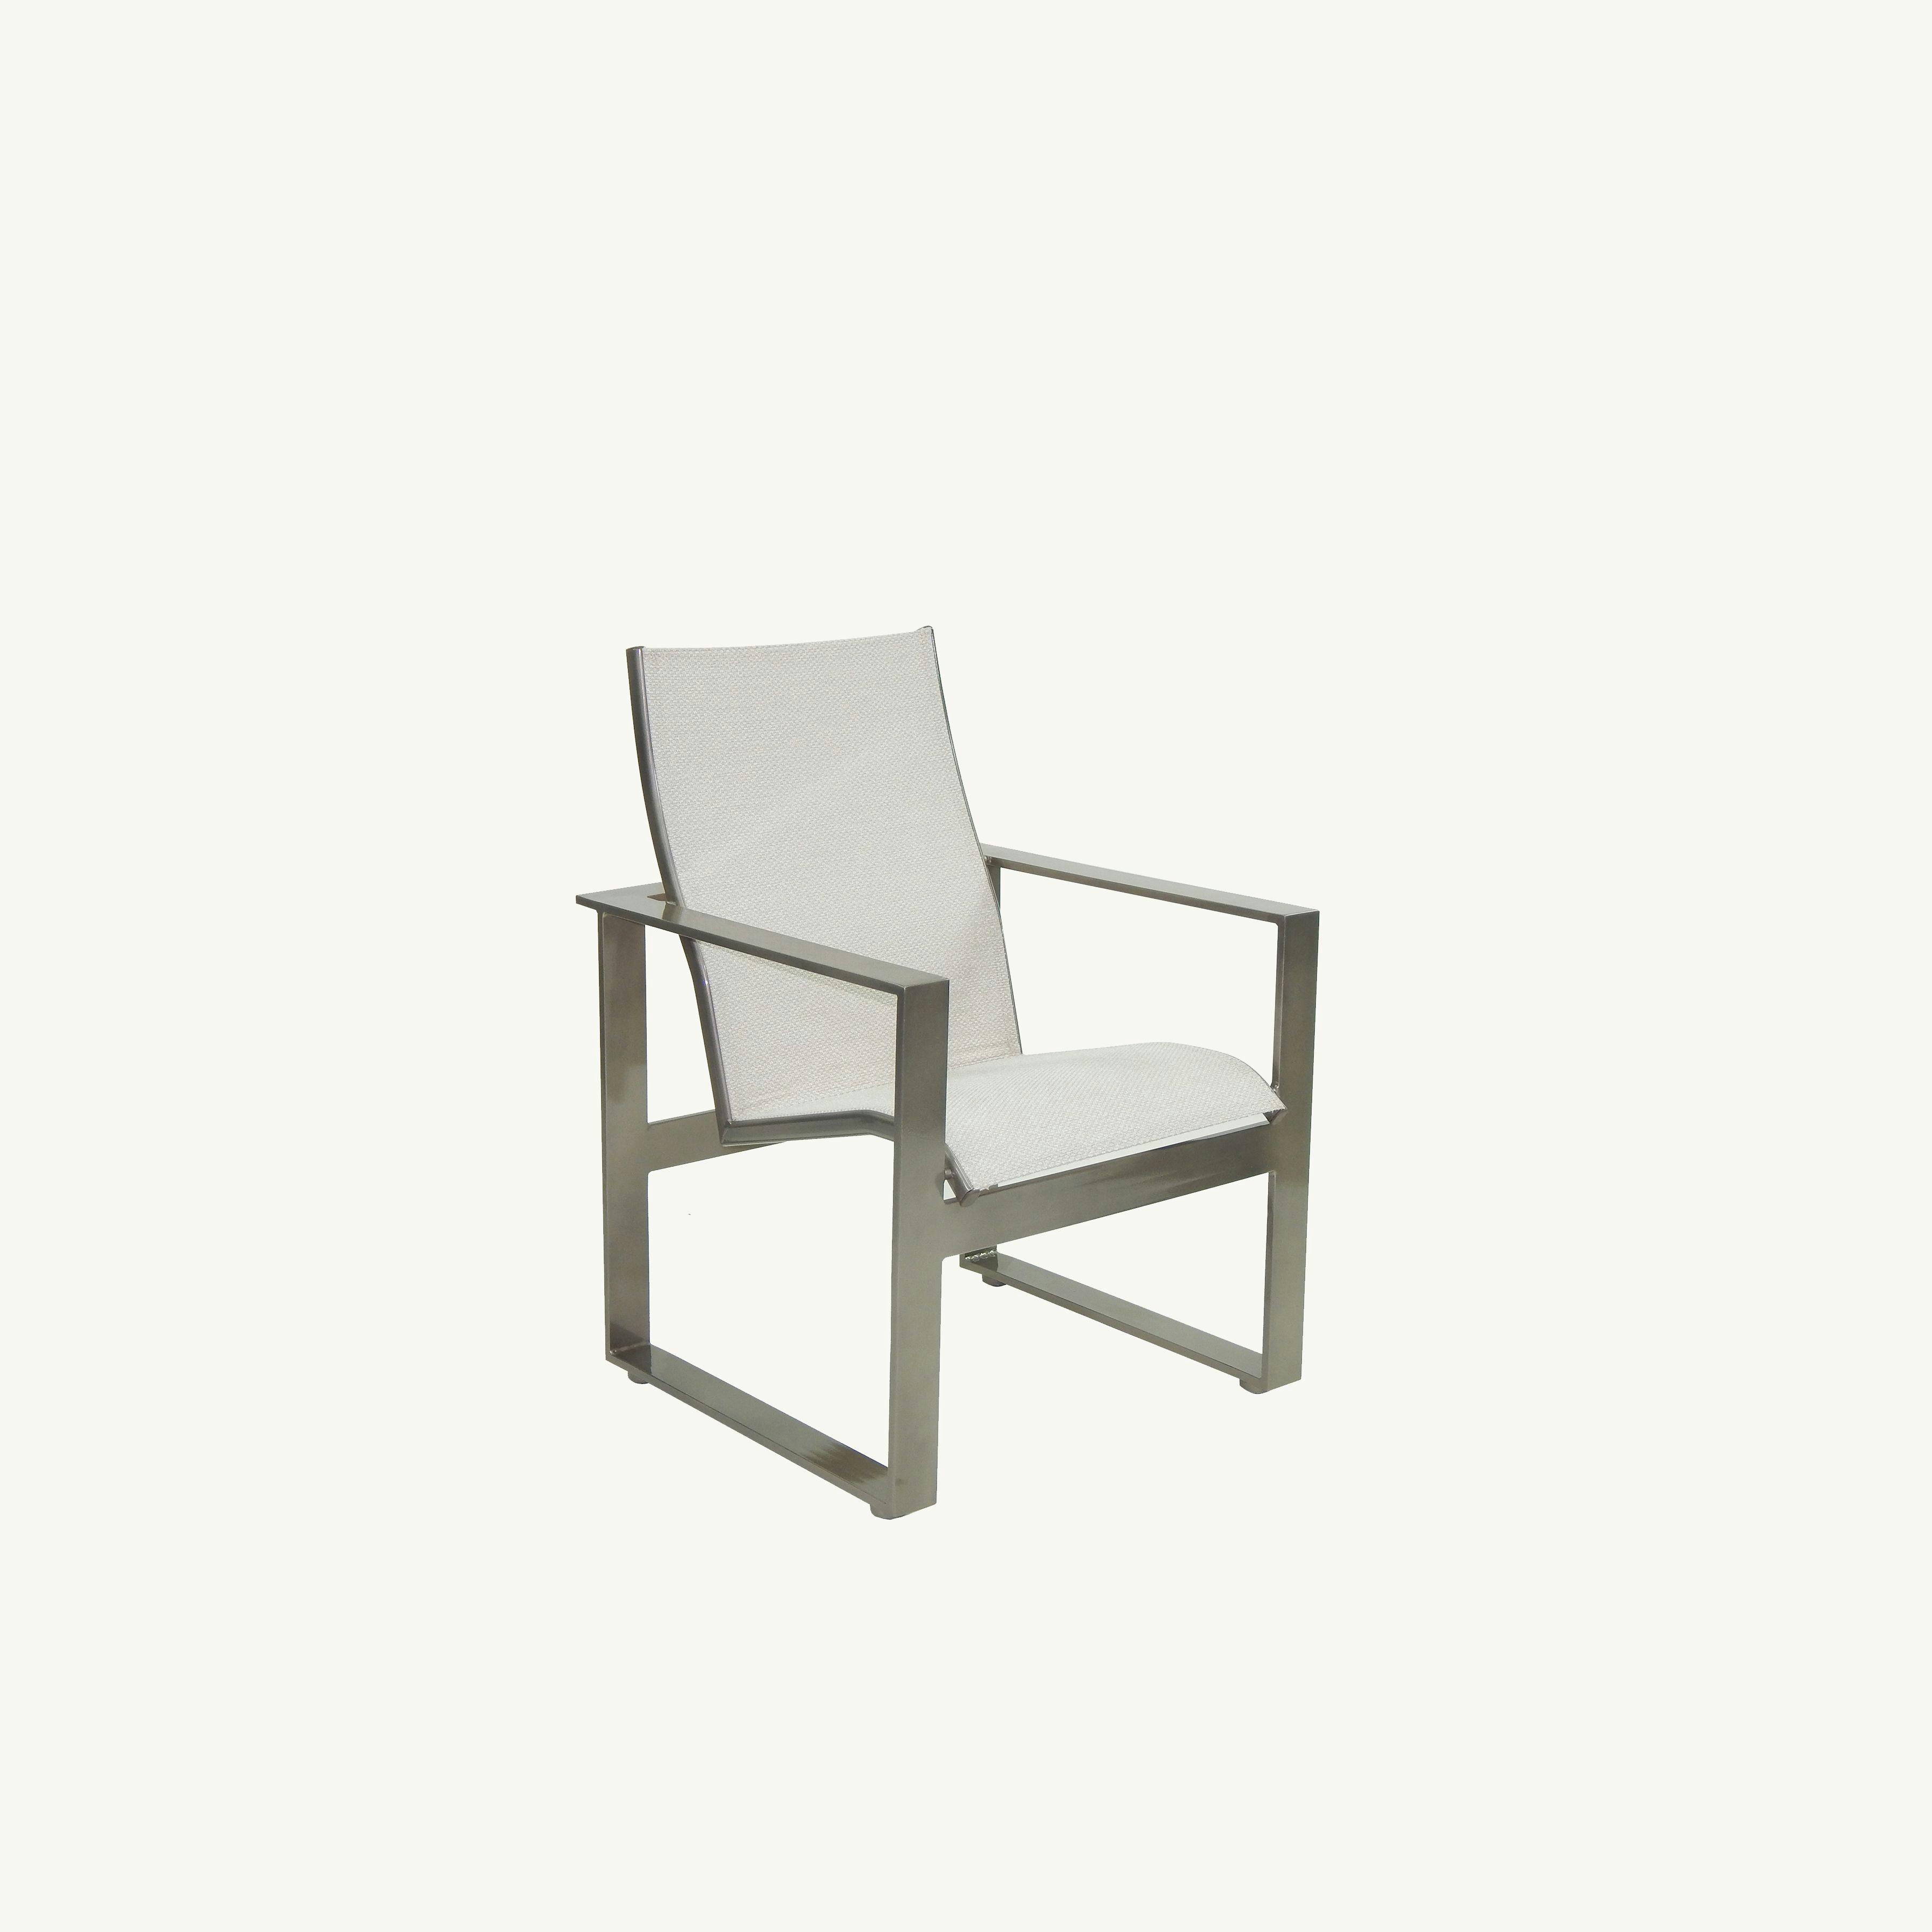 Park Place Sling Dining Chair